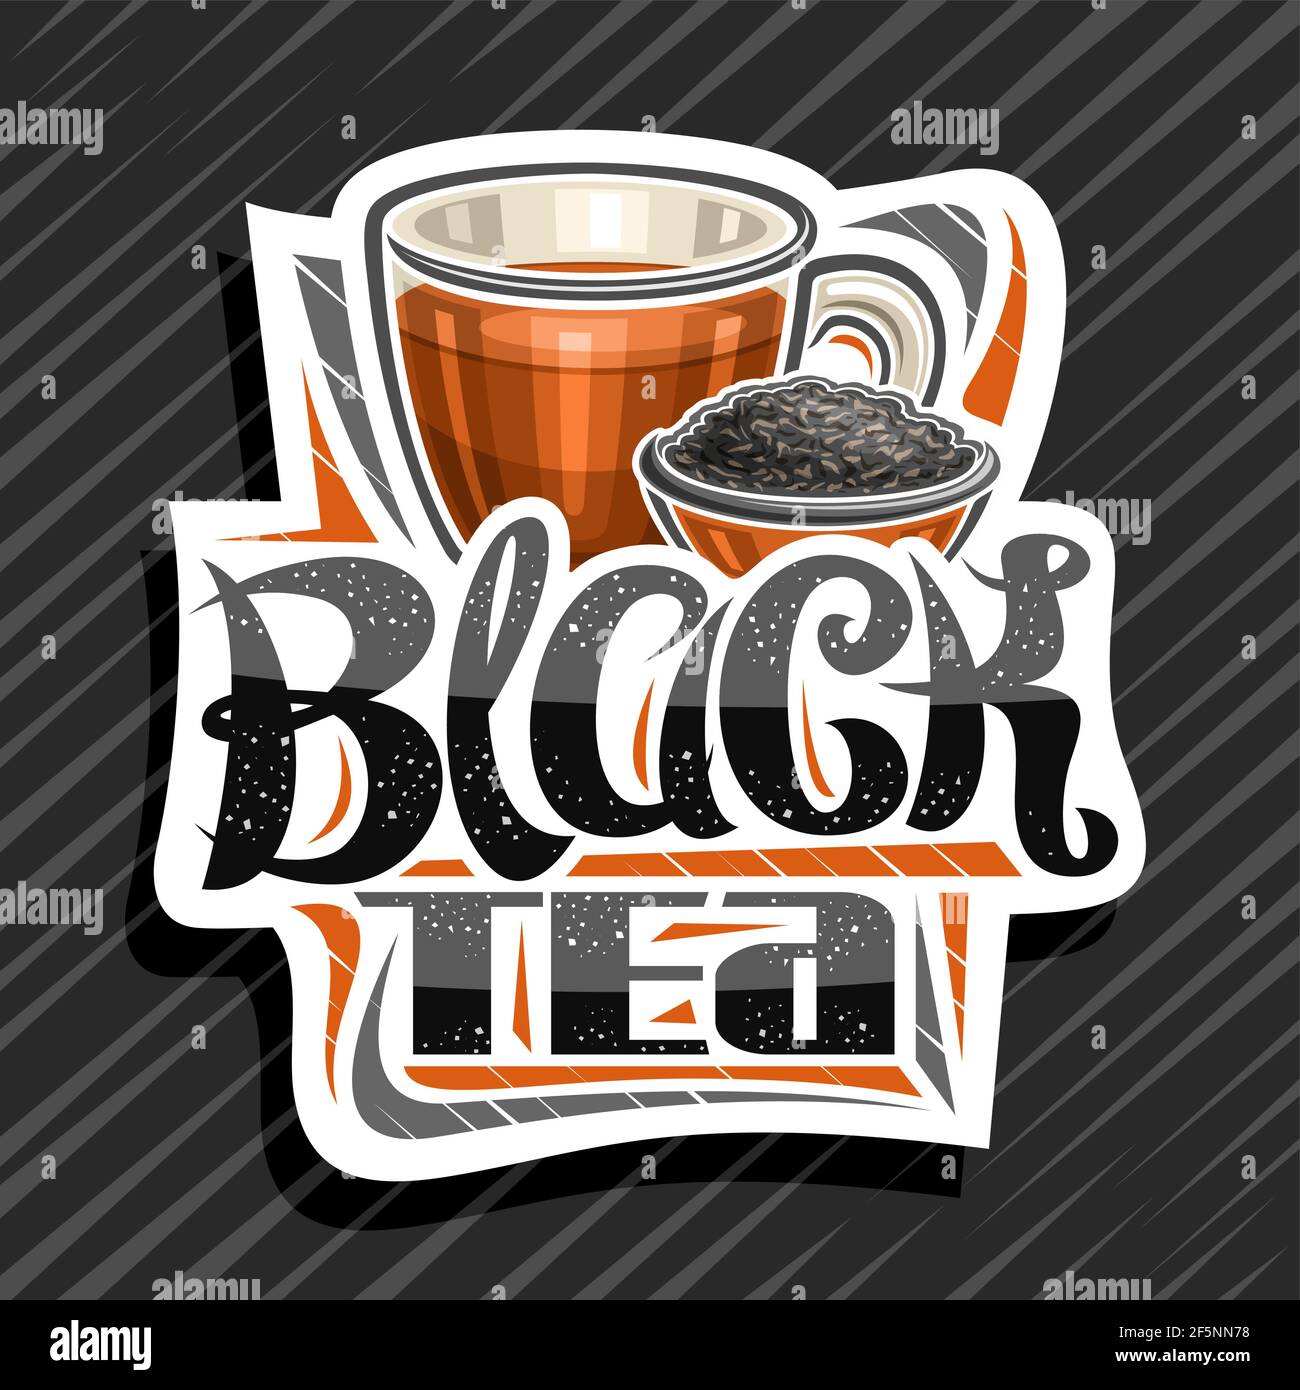 Vector logo for Black Tea, decorative cut paper label with illustration of transparent teacup with orange drink, small bowl with dried blended tea, wh Stock Vector